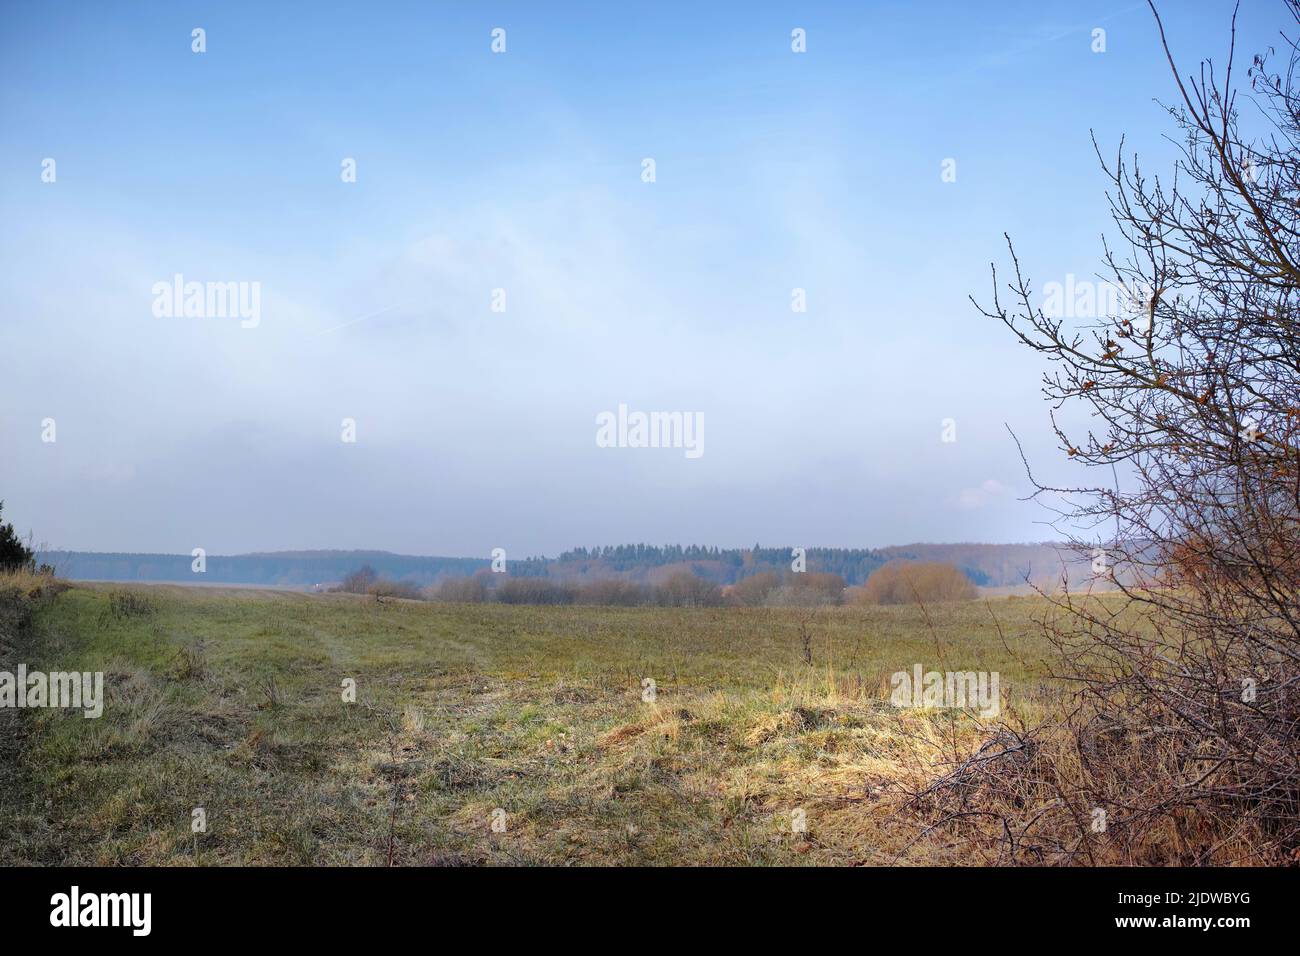 Landscape of an open farmland with dry grass, leafless trees and thorny bushes. Wild shrubs growing on an empty agricultural field at the end of Stock Photo